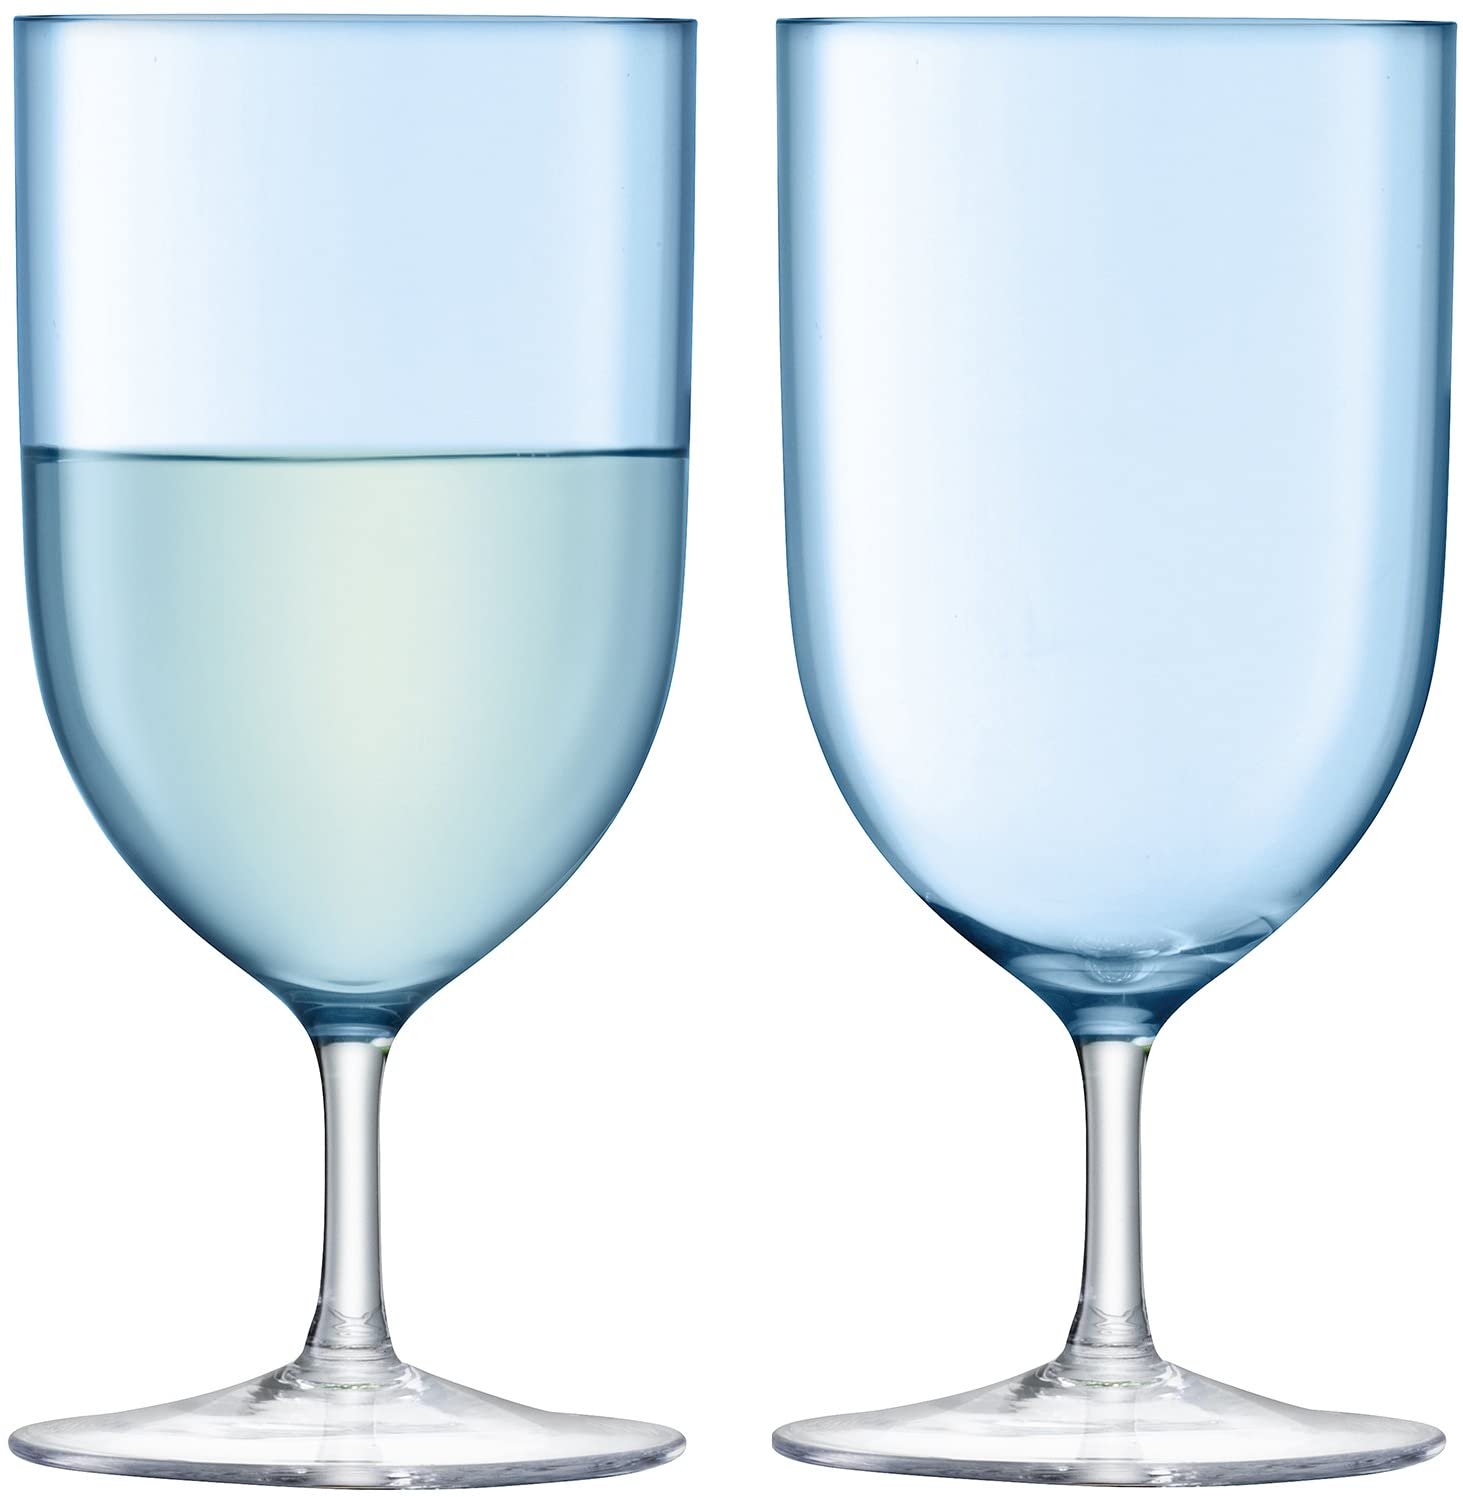 LSA International Touch Wine/Water Glasses 400ml Pale x 2, Turquoise, 8 x 8 x 16.5 cm